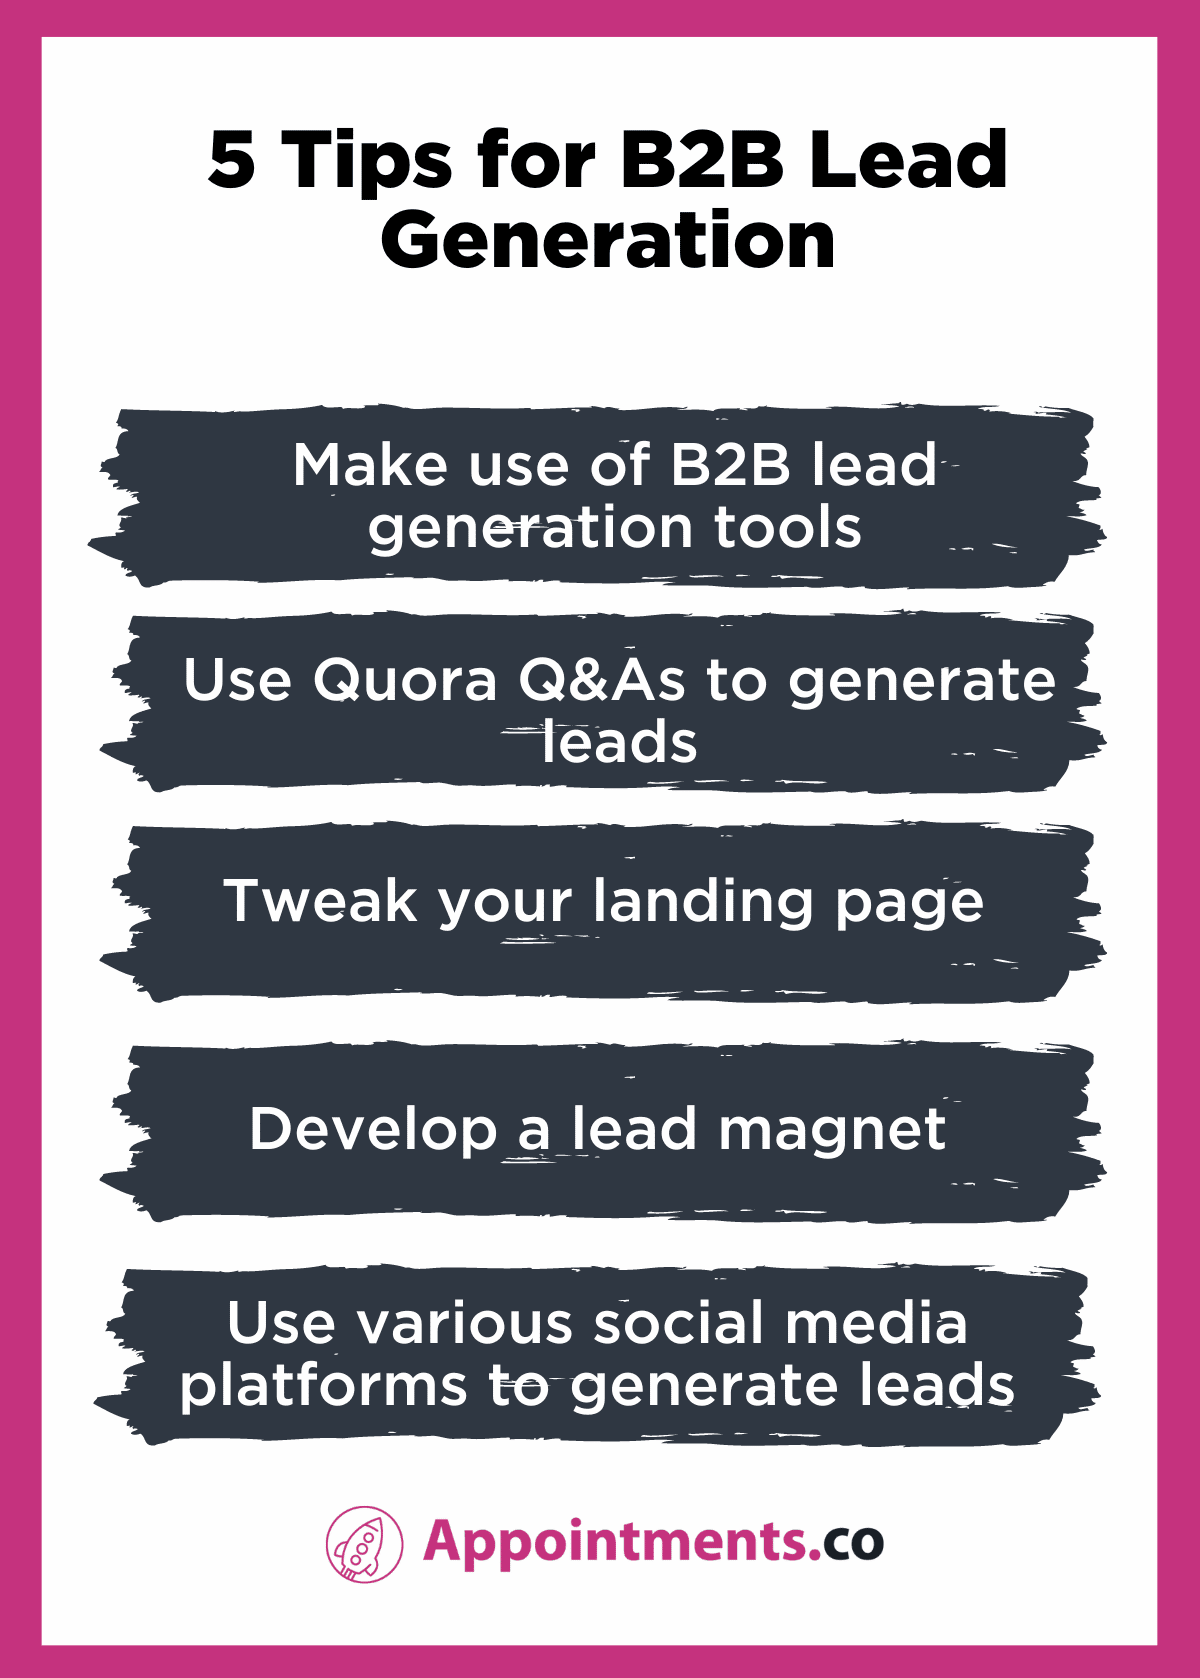 5 Tips for B2B Lead Generation